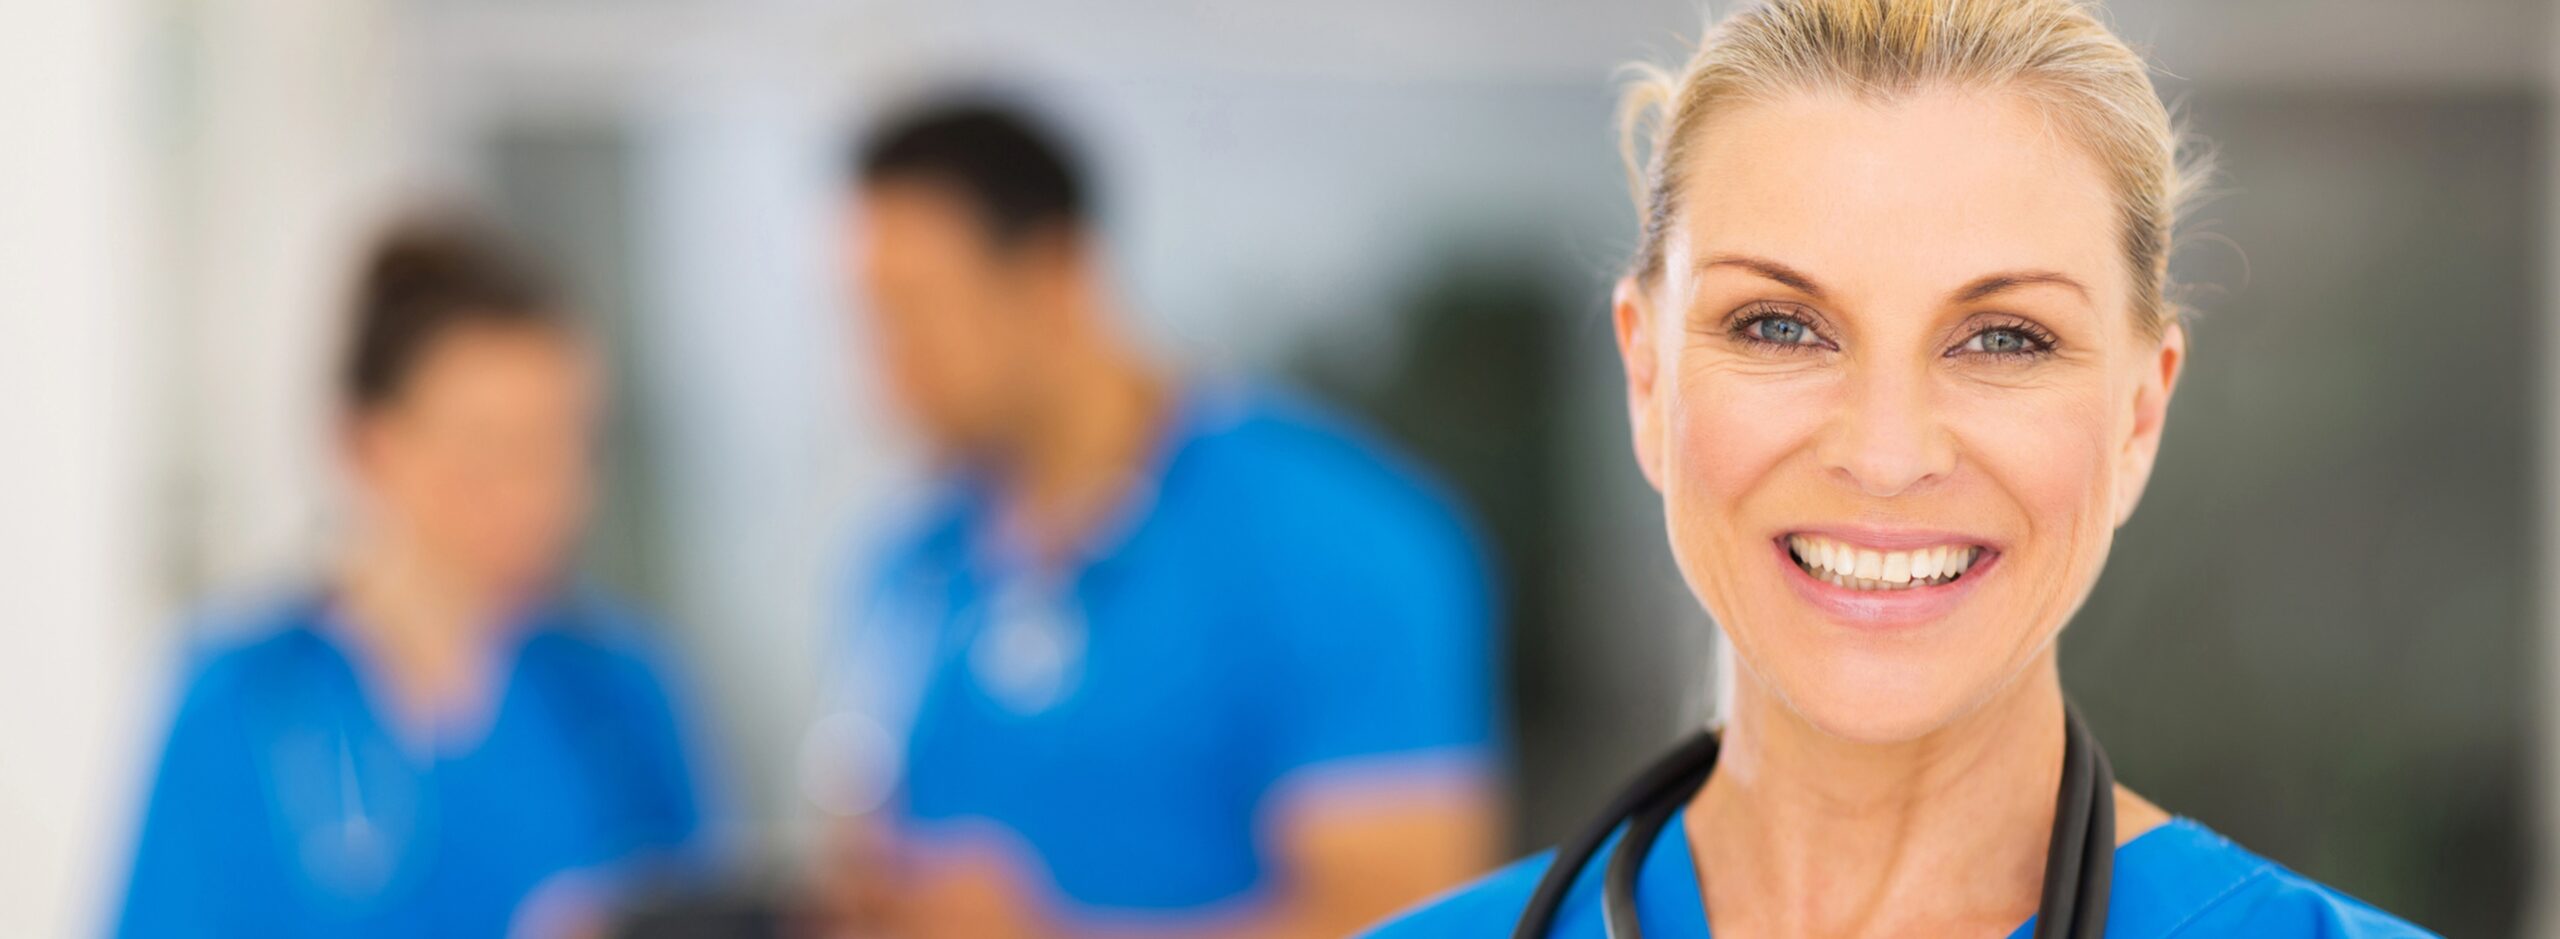 close-up of a female doctor smiling and wearing blue scrubs